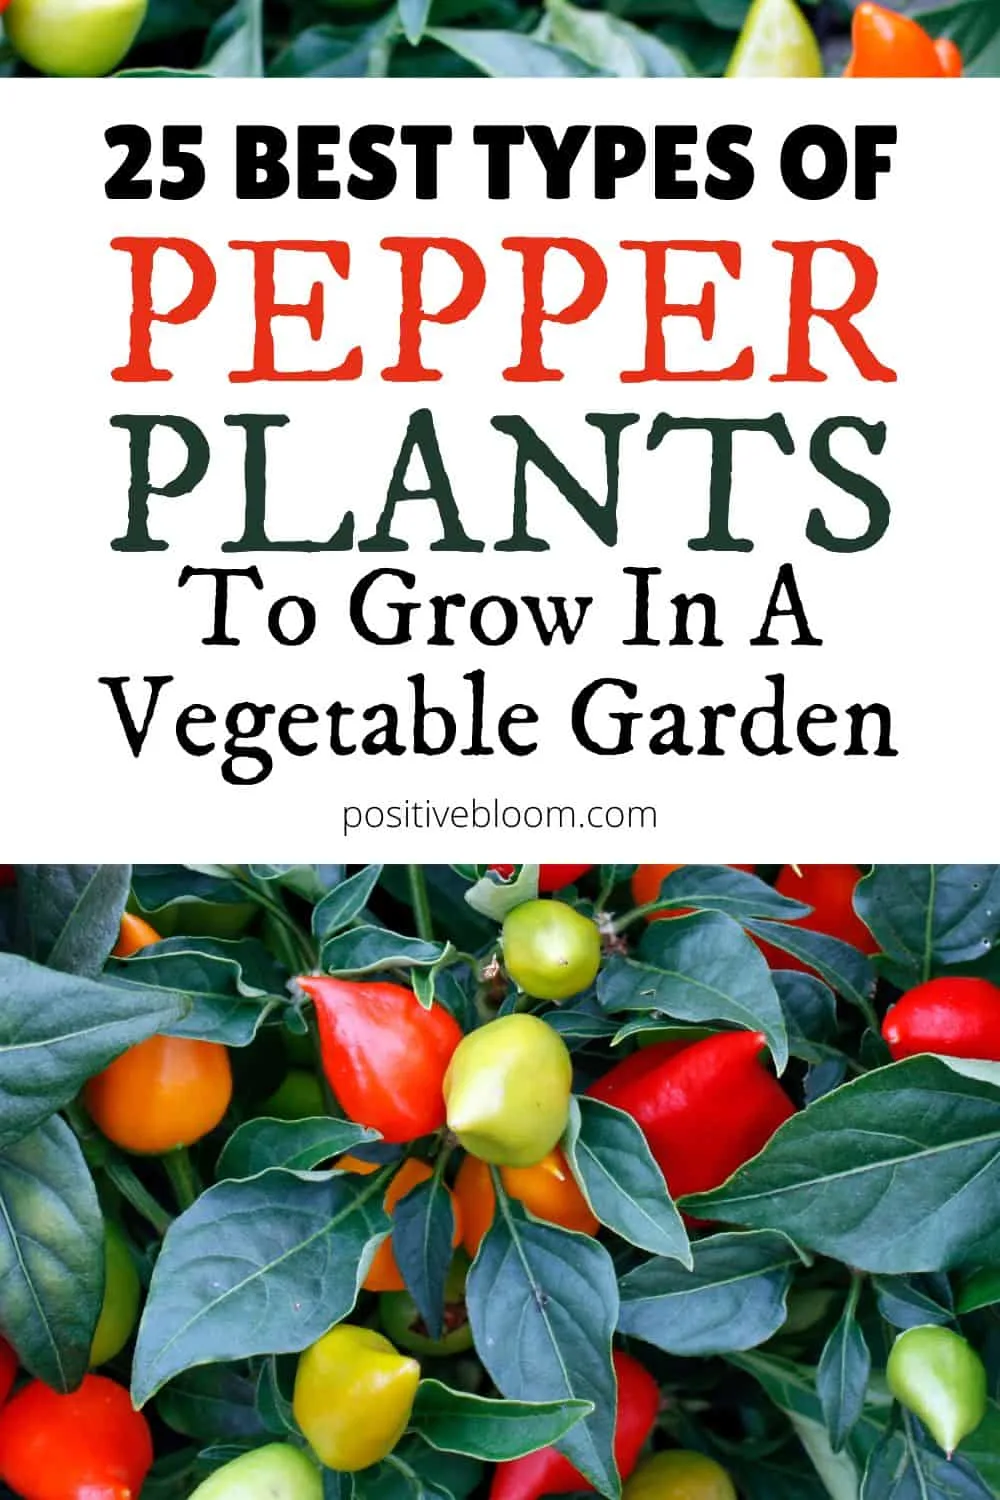 25 Best Types Of Pepper Plants To Grow In A Vegetable Garden